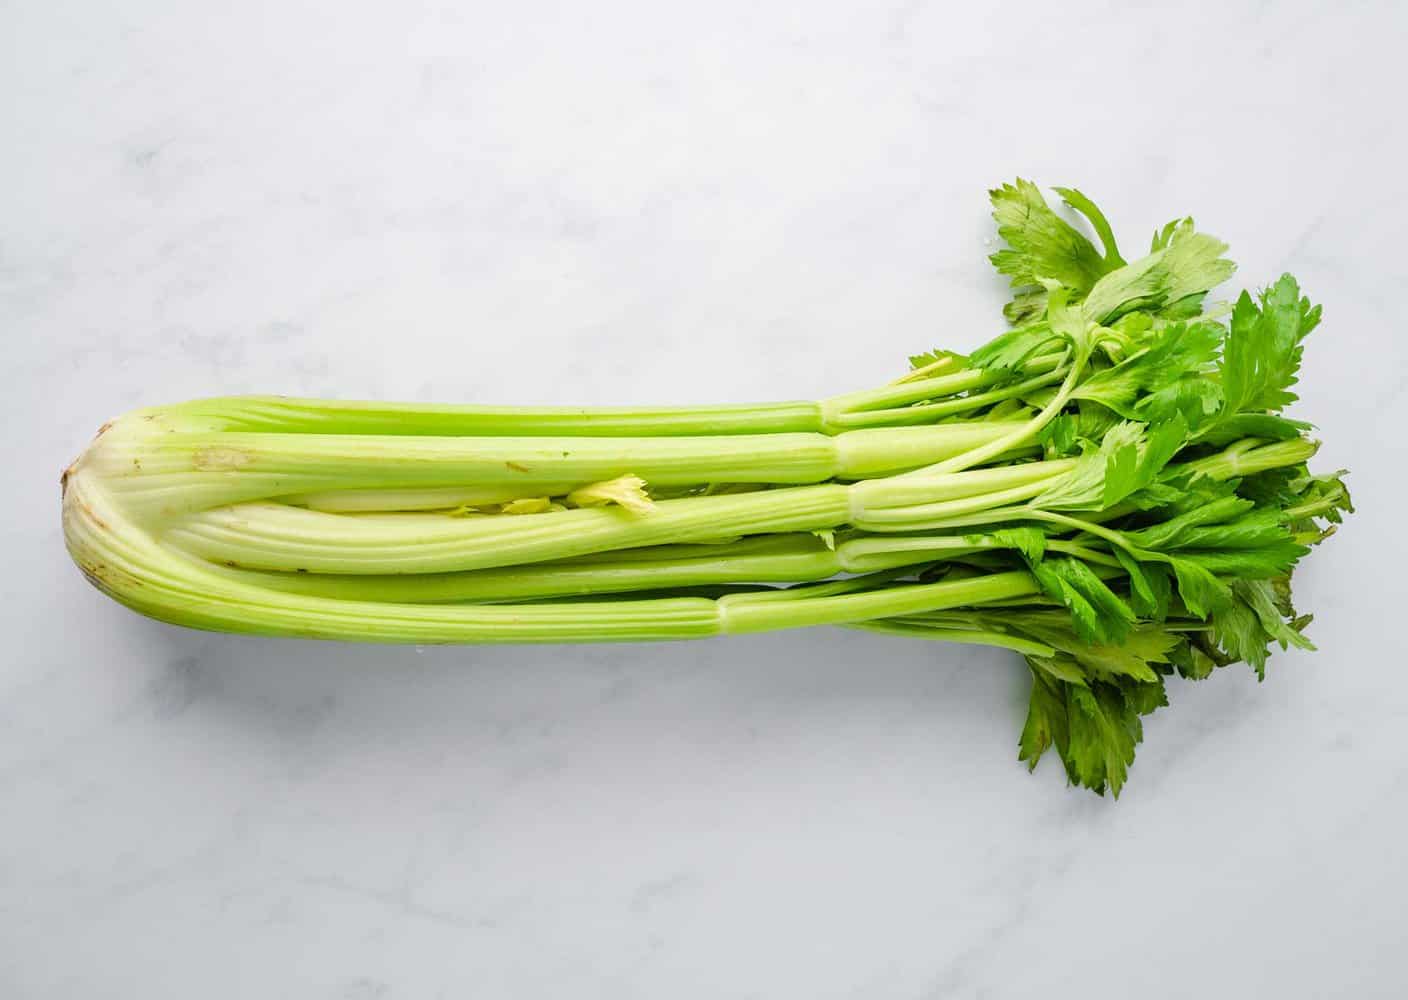 Celery stalk laying flat on working surface.